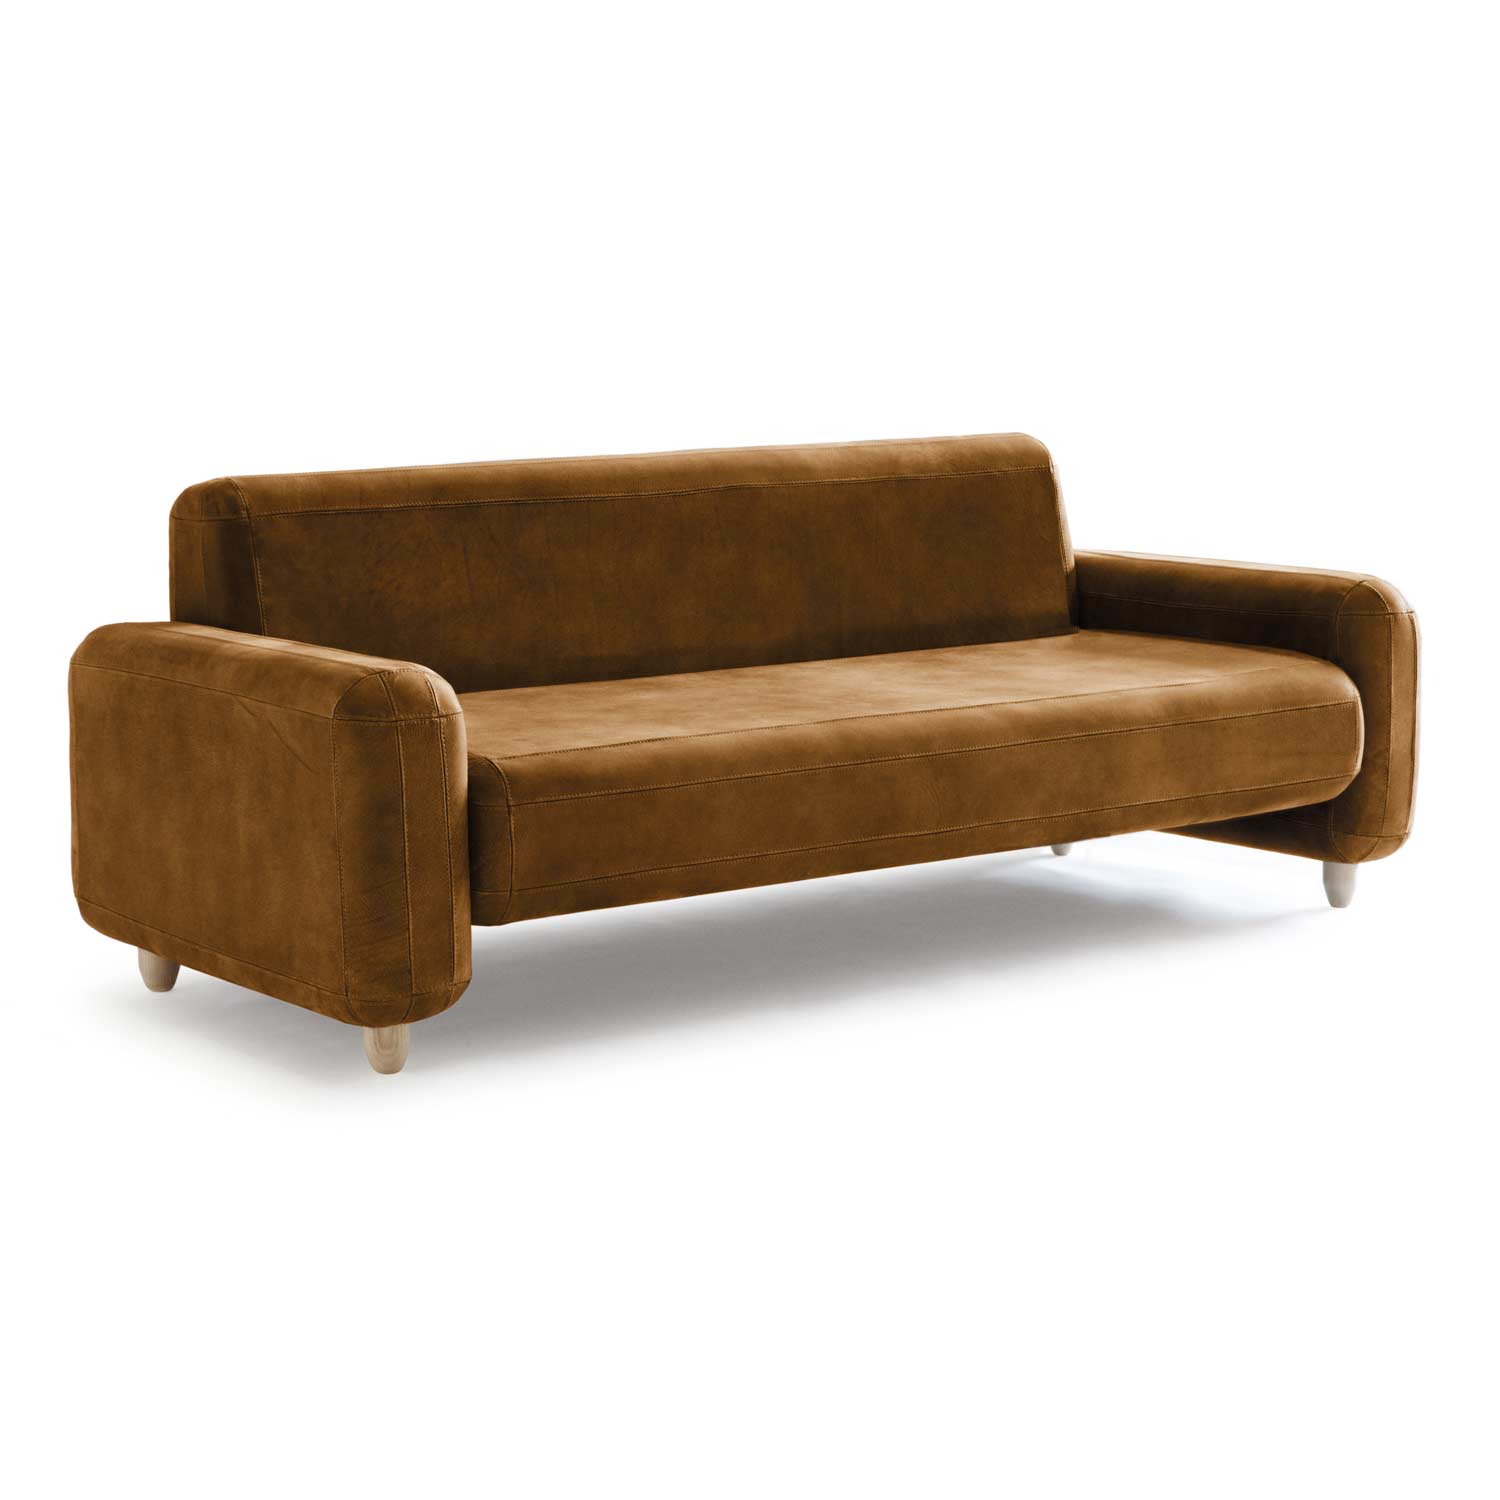 Refined Details for Handcrafted Elegance, cognac leather sofa